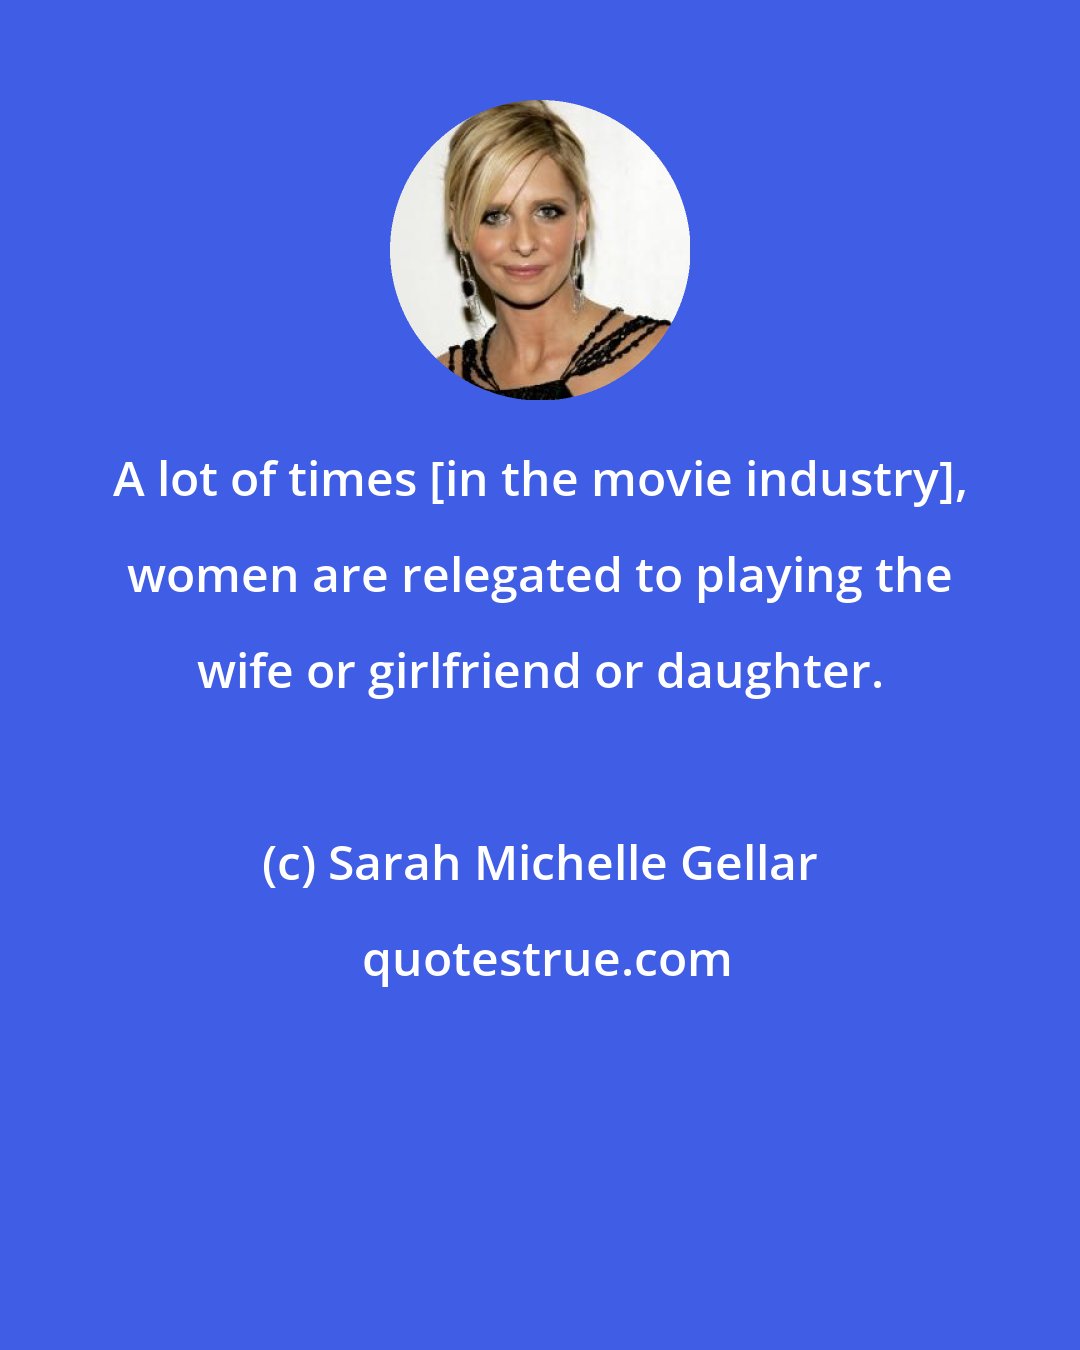 Sarah Michelle Gellar: A lot of times [in the movie industry], women are relegated to playing the wife or girlfriend or daughter.